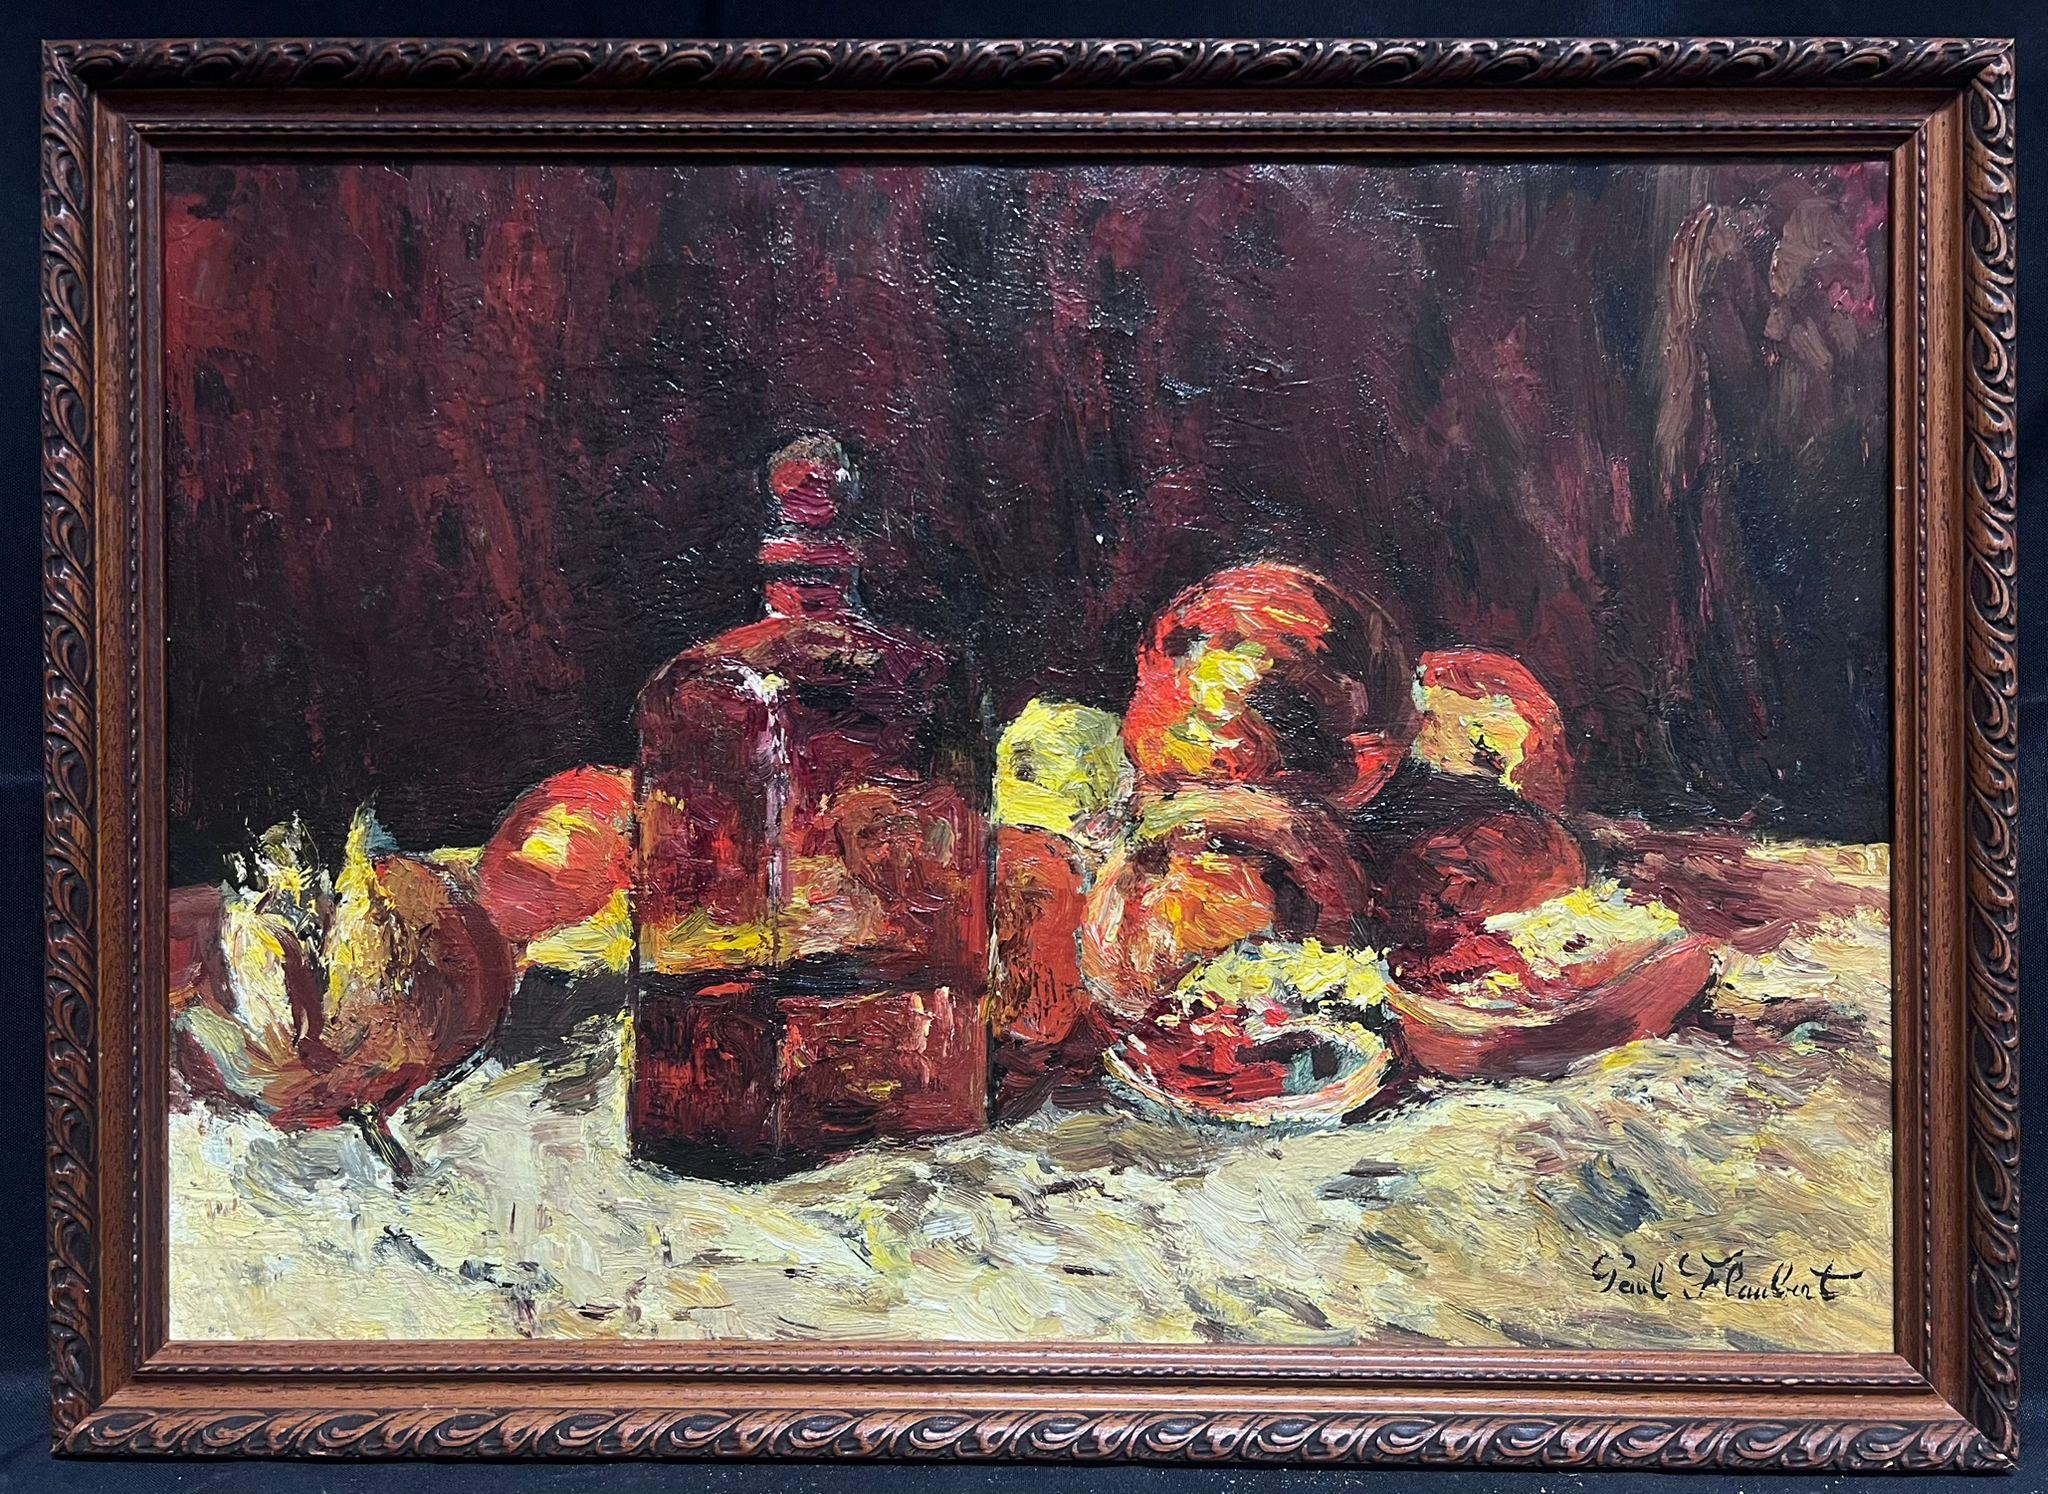 Still Life
by Paul Flaubert (1928-1994, French)
signed oil on canvas, framed
framed: 17 x 24 inches
canvas: 15 x 22 inches
provenance: private collection, France
condition: very good and sound condition